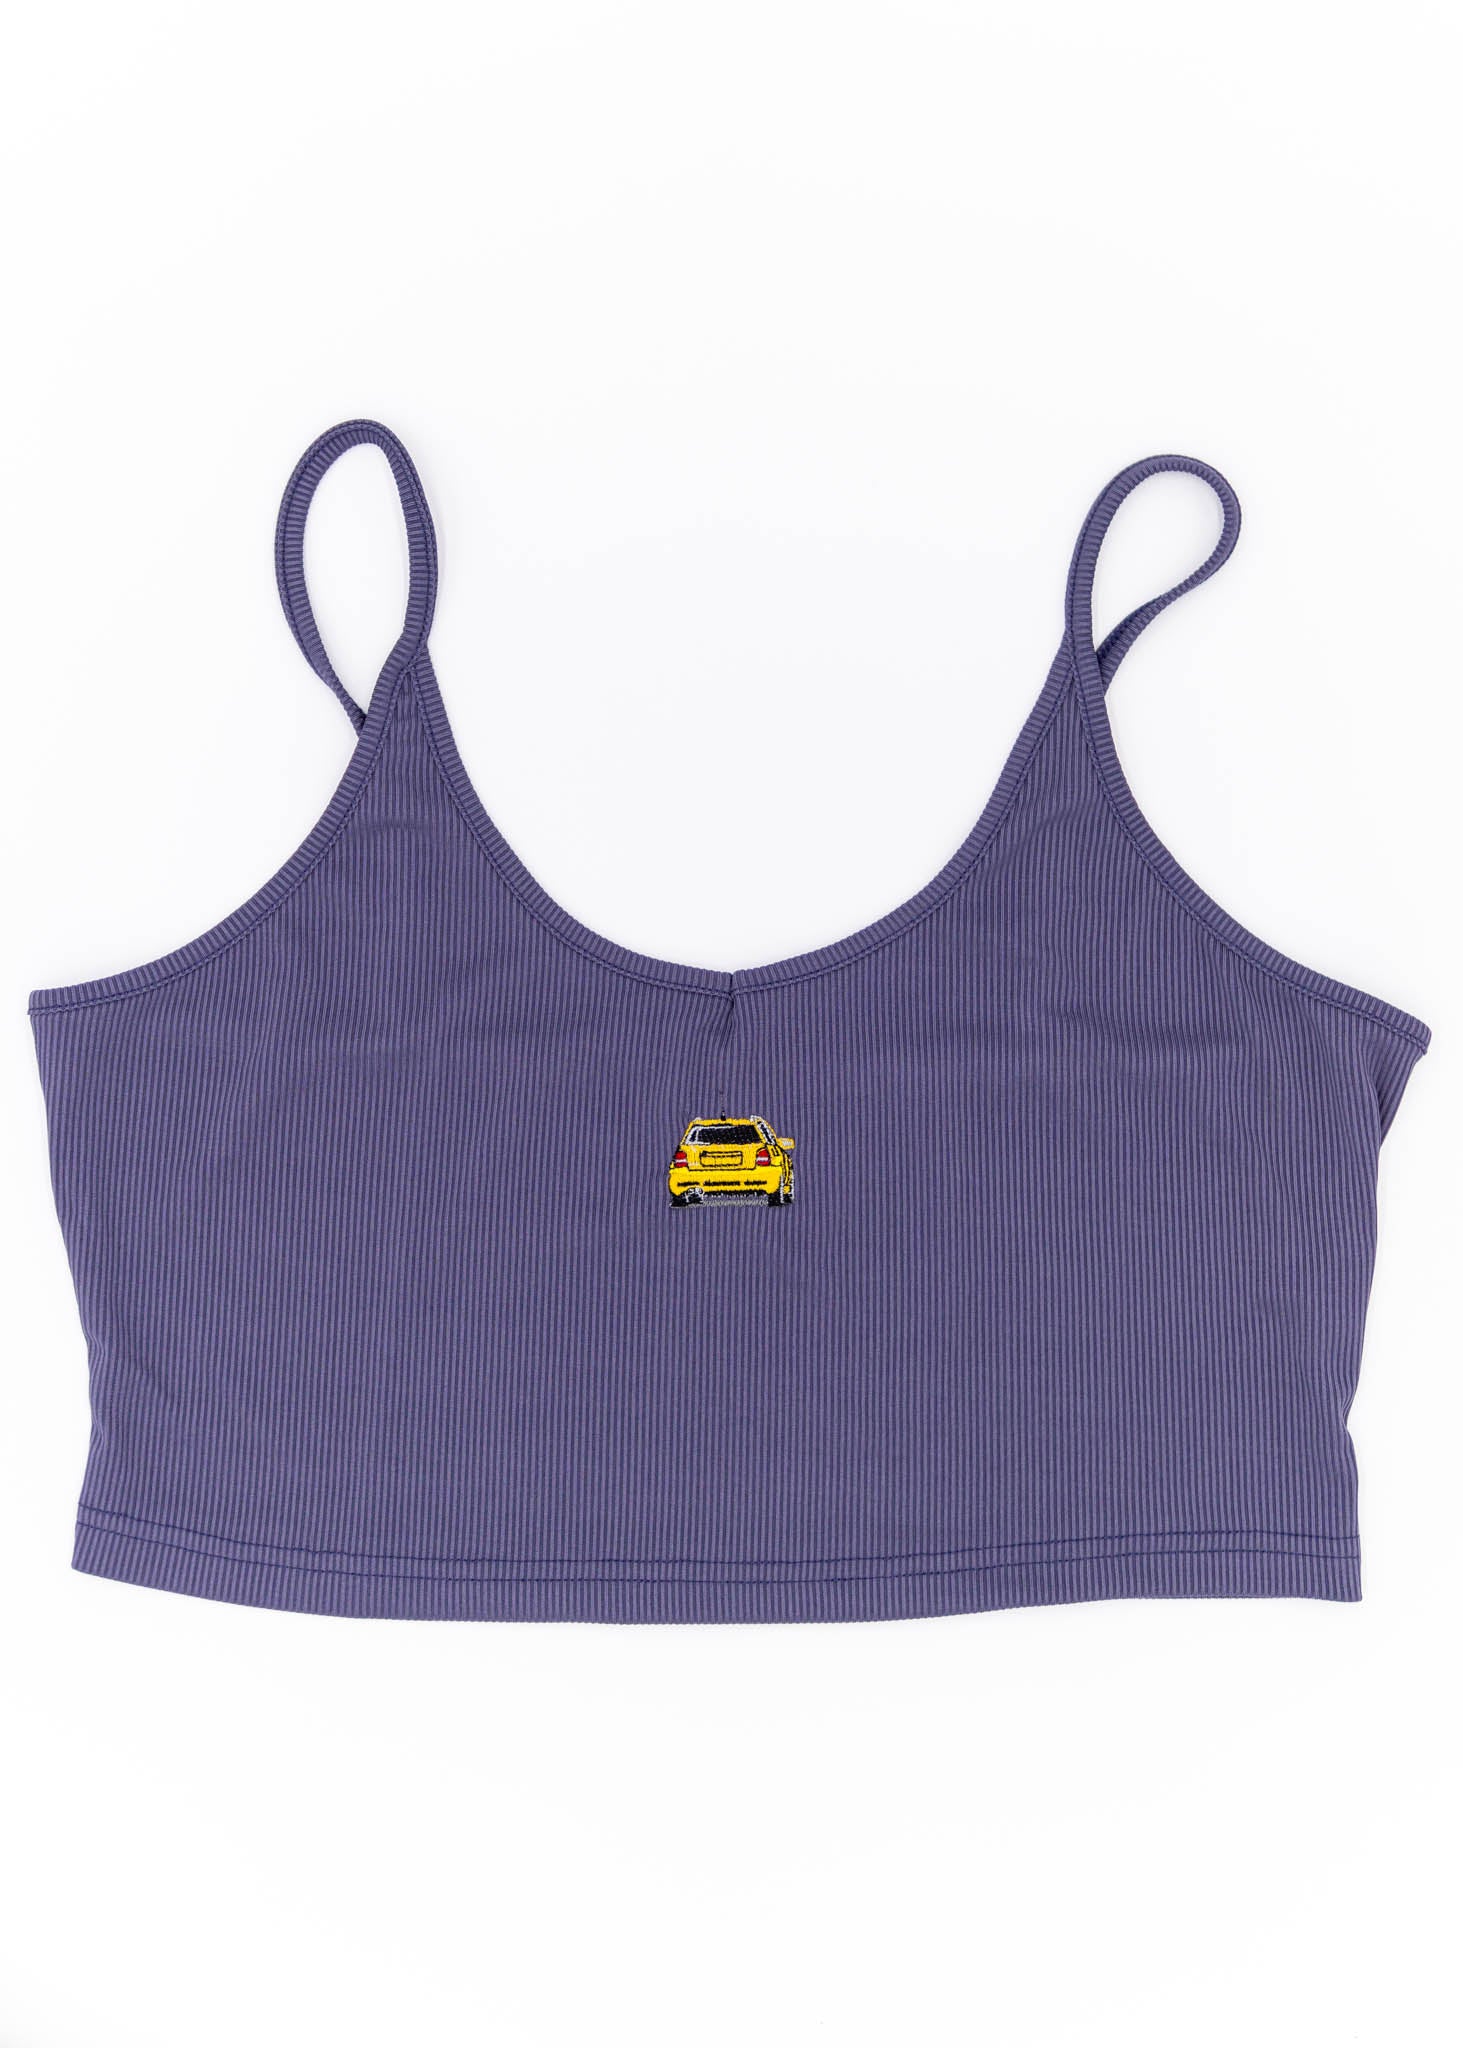 A purple Audi crop top for plus size women. Photo is a front view of the top with an embroidered Imola Yellow Audi B5 RS4. Fabric composition is polyester, and spandex. The material is stretchy, ribbed, and non-transparent. The style of this shirt is sleeveless, with a deep neckline.